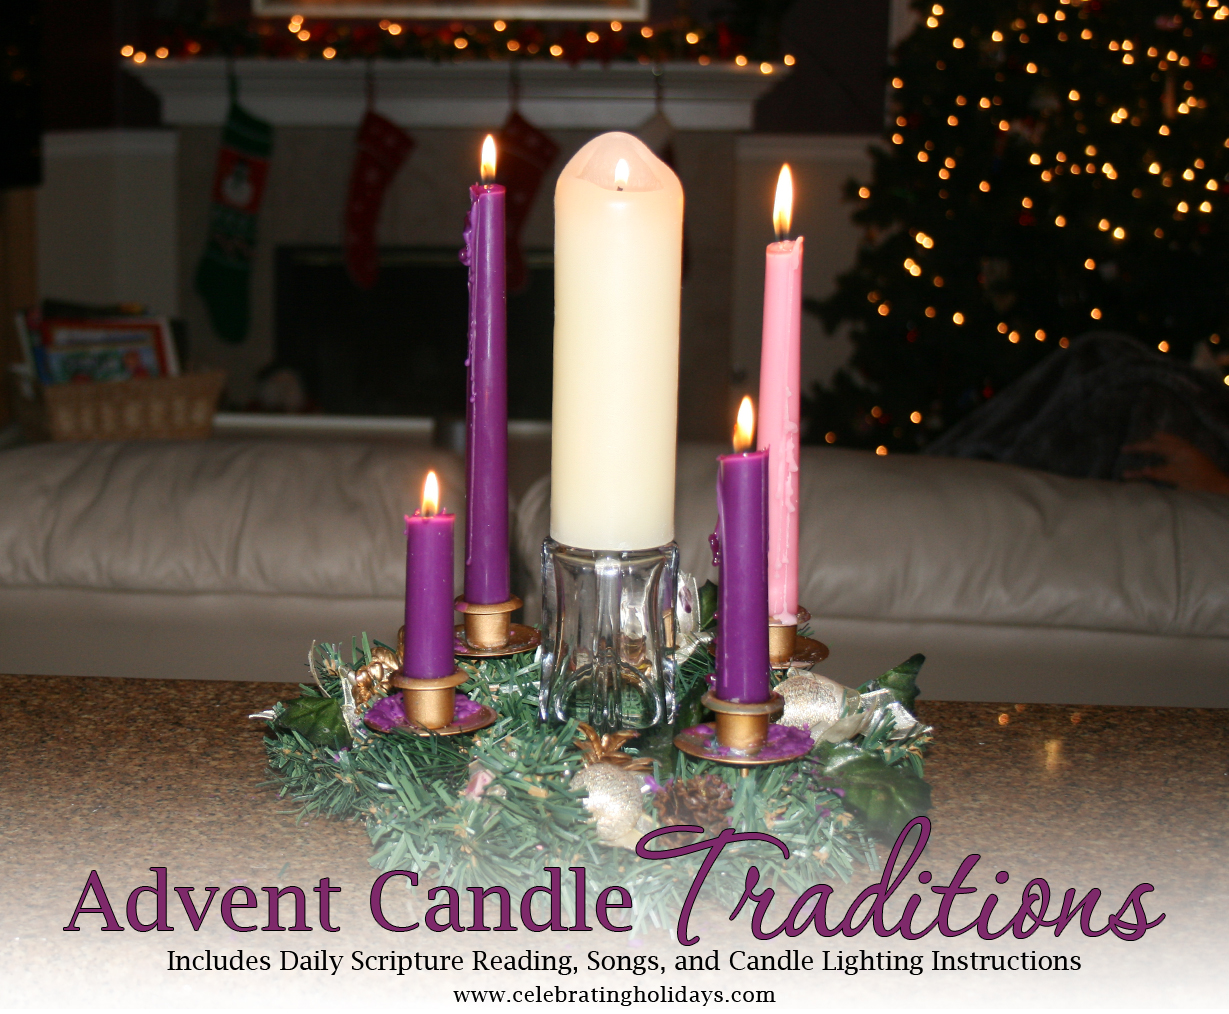 Advent Wreaths and Candles